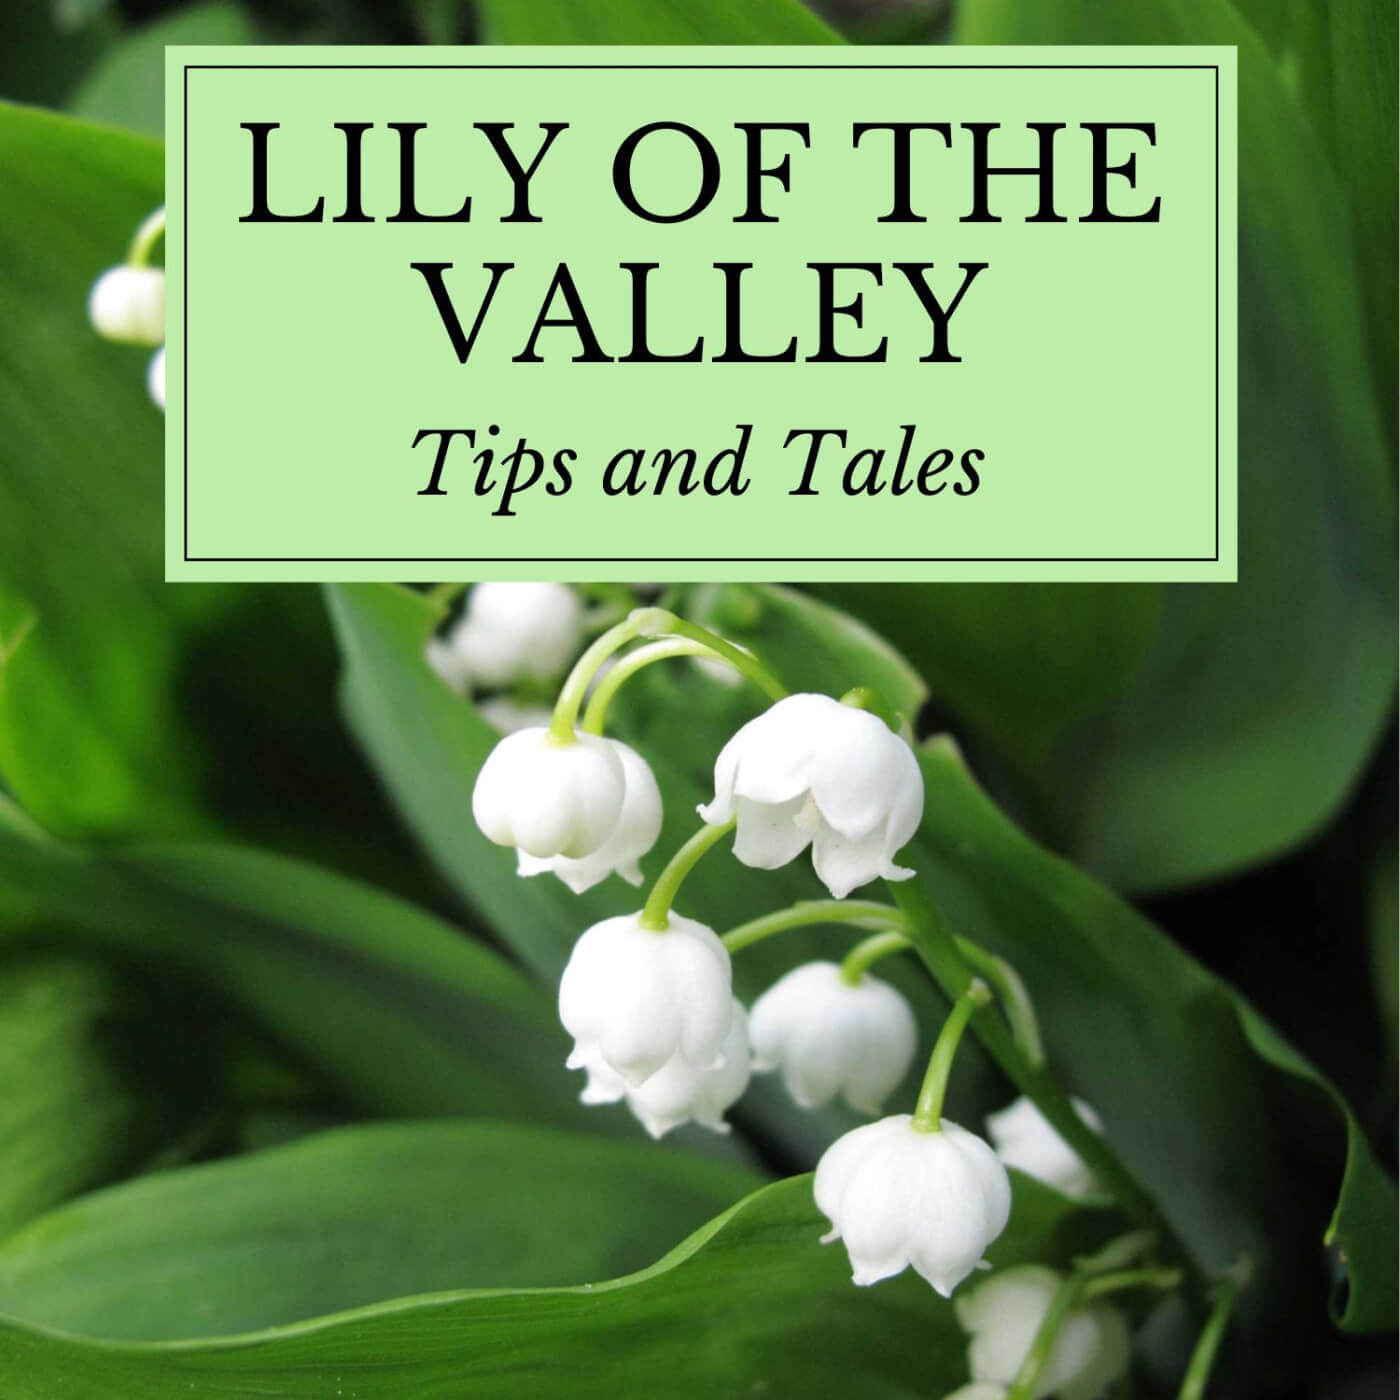 Buy Giant Lily of the Valley Plants